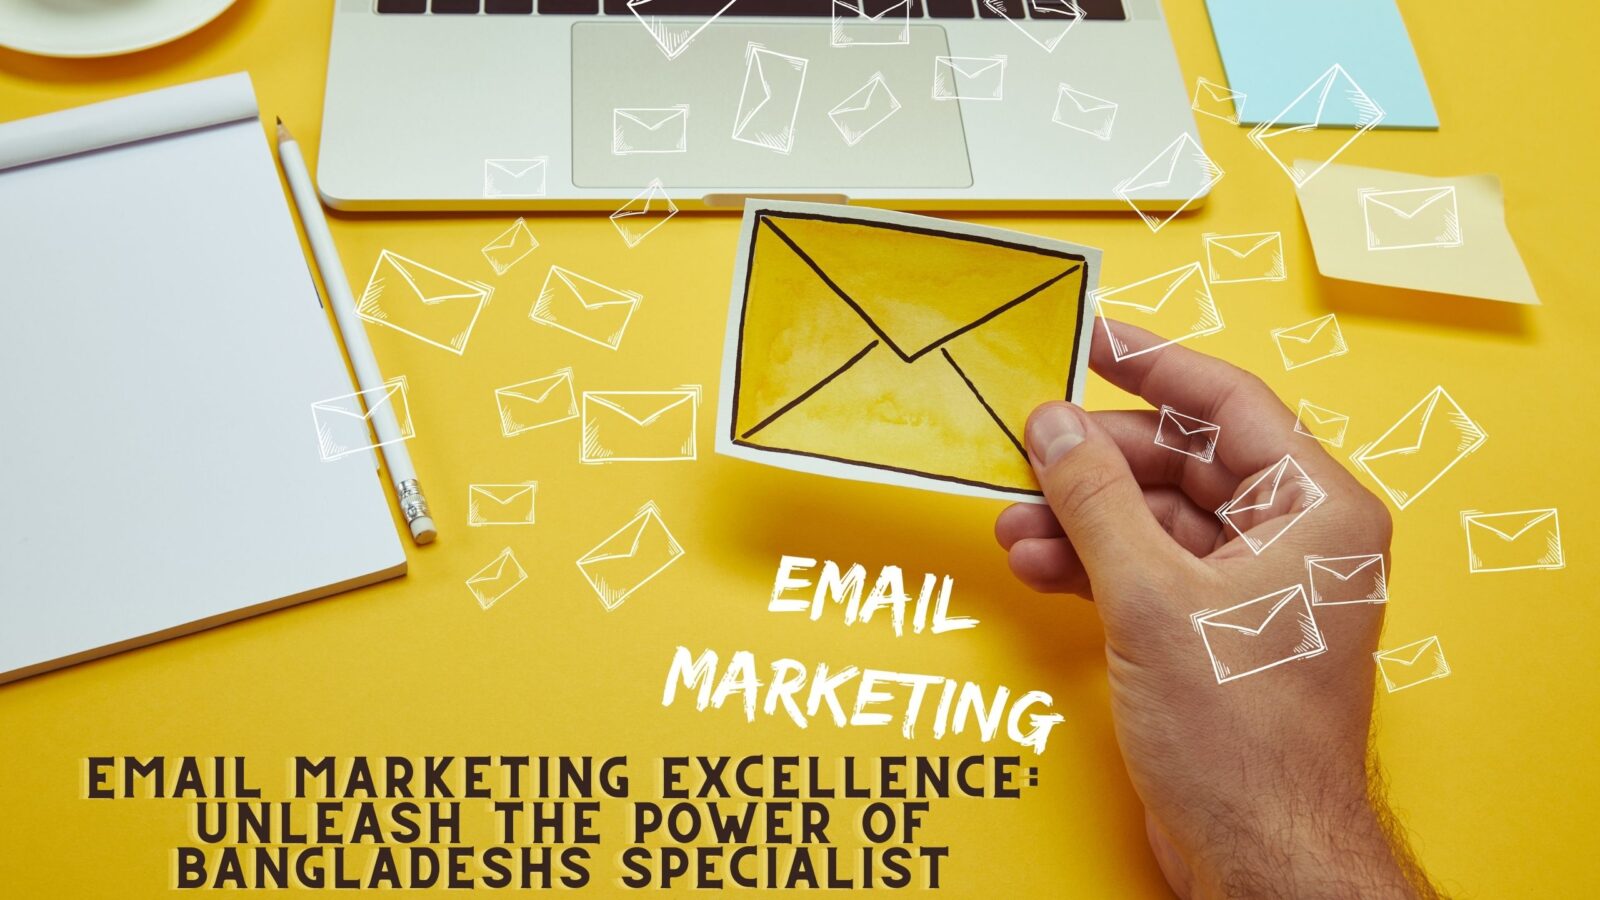 Email Marketing Excellence: Unleash the Power of Bangladeshs Specialist